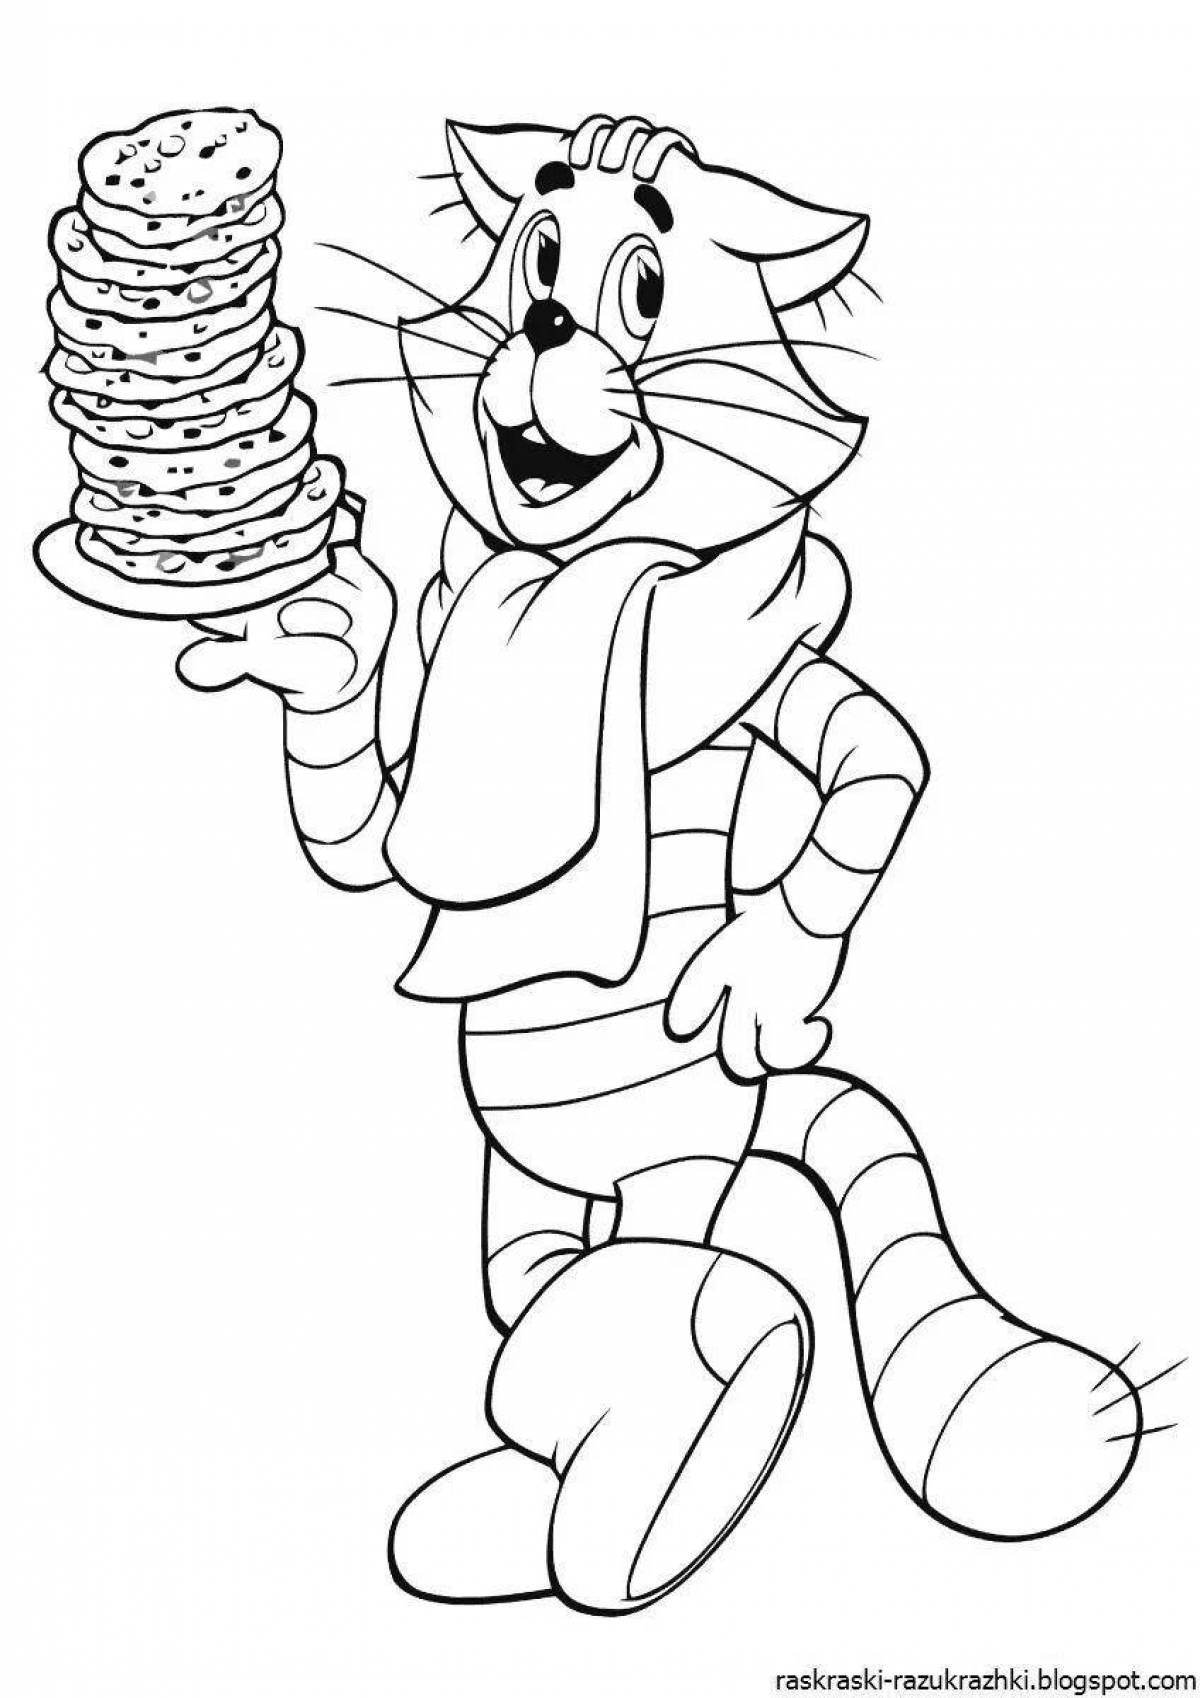 Coloring page Happy Shrove Tuesday